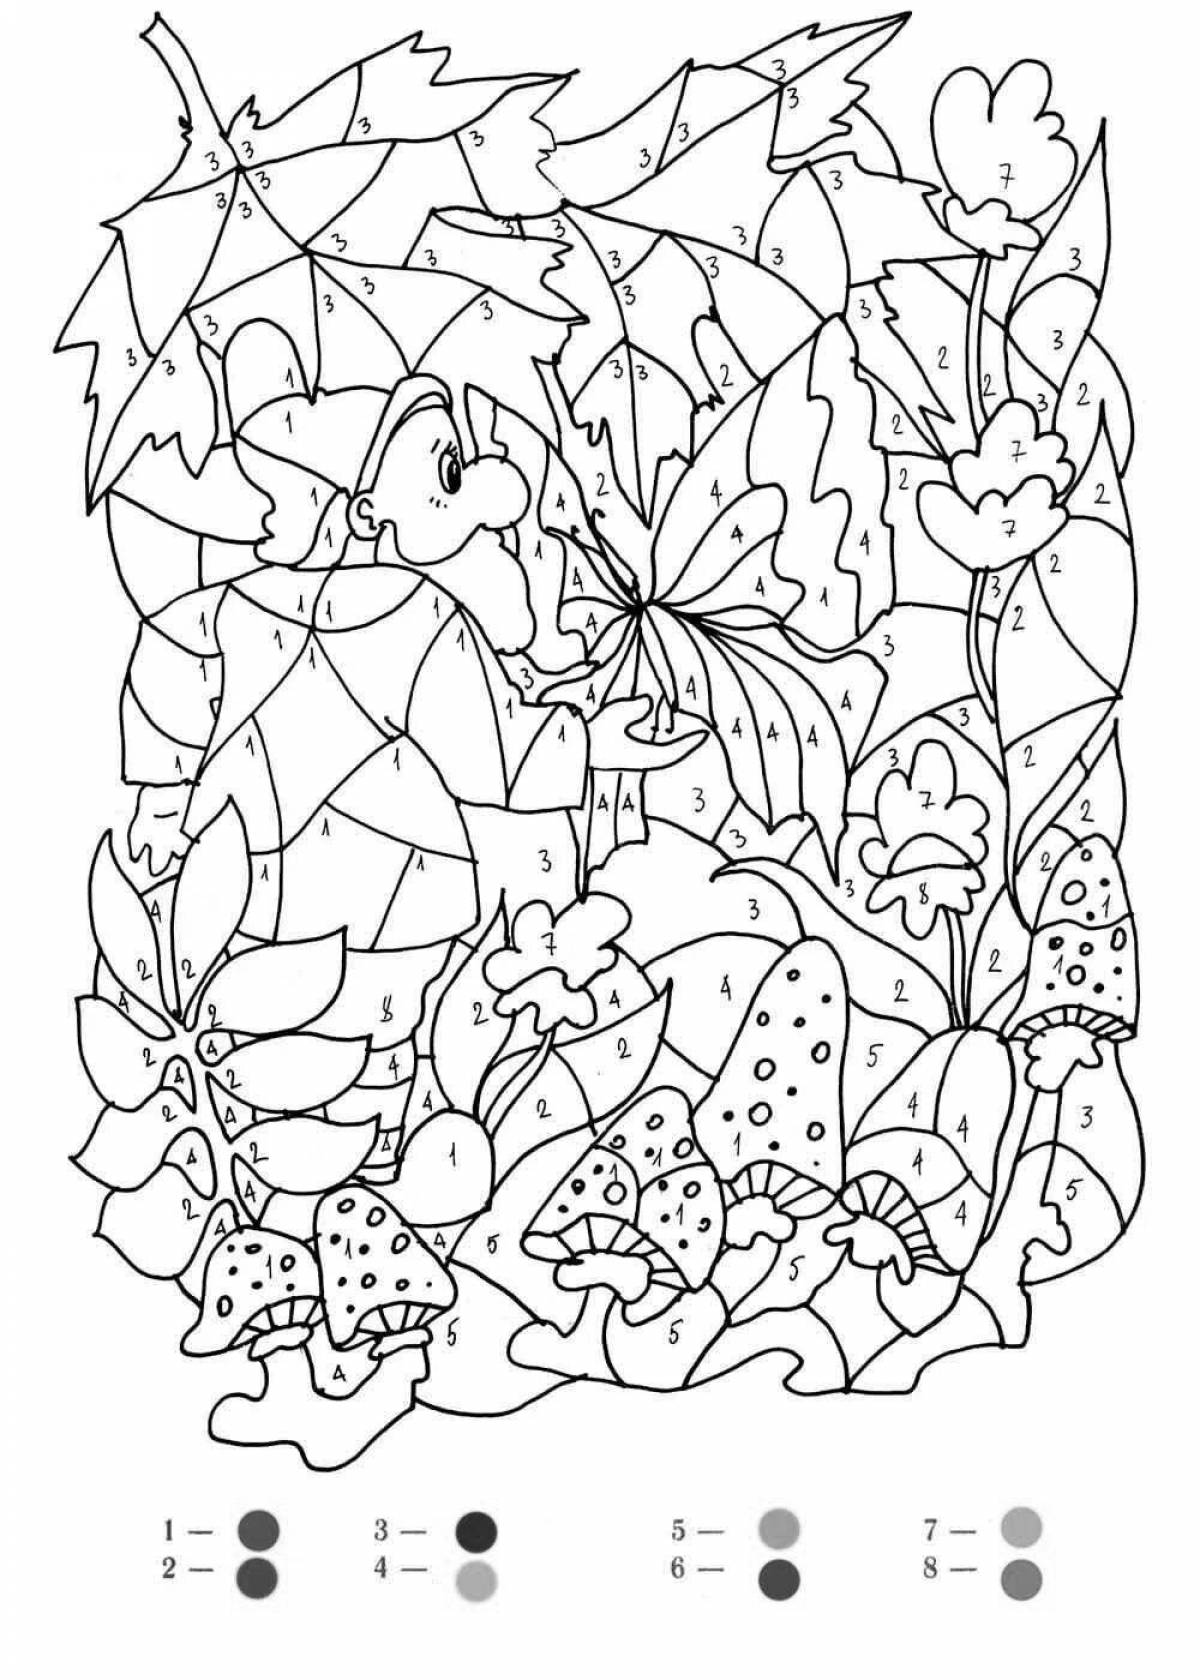 Colored fun coloring book for kids with colored numbers